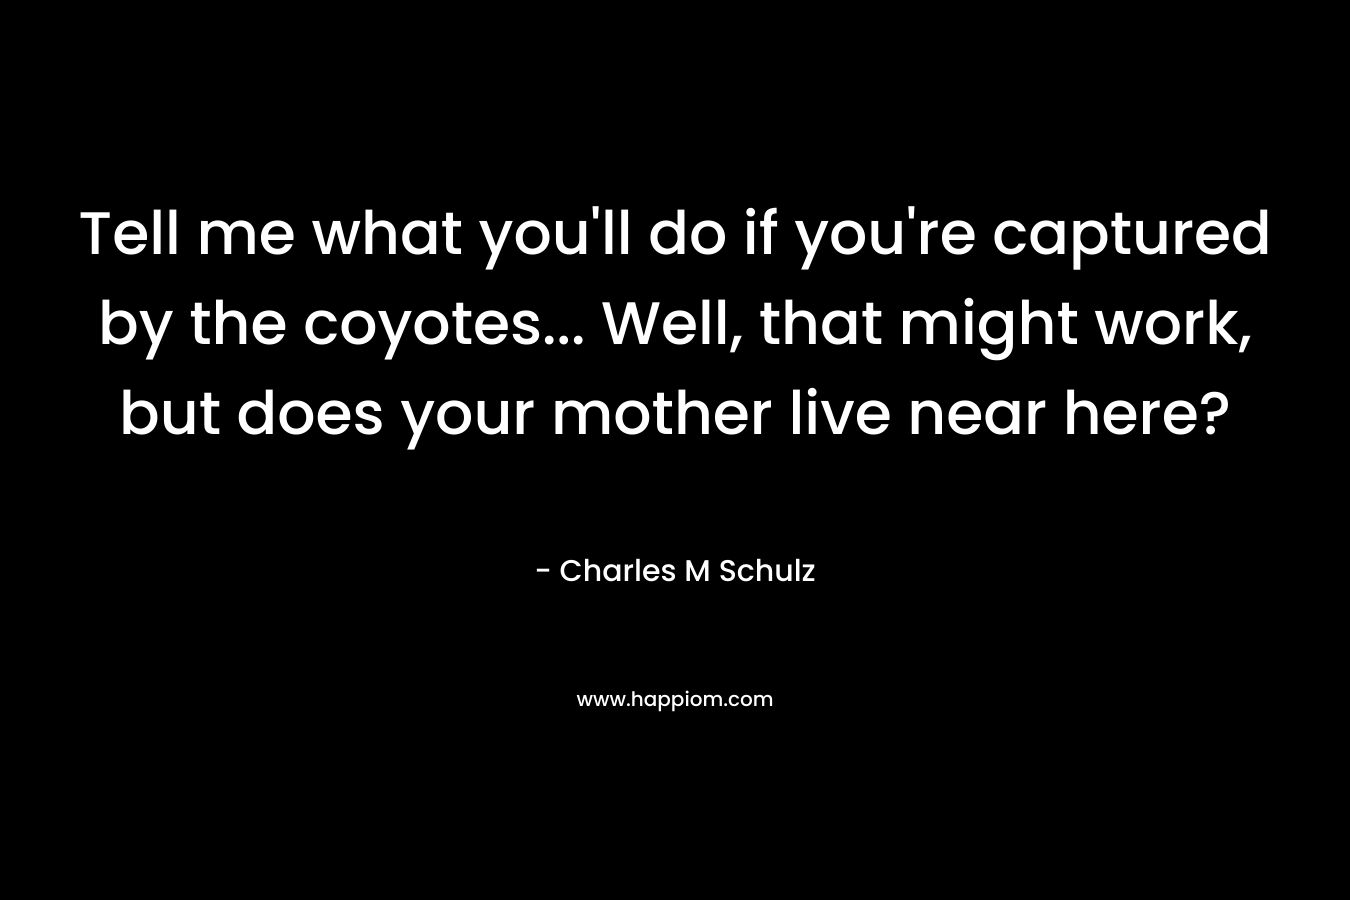 Tell me what you'll do if you're captured by the coyotes... Well, that might work, but does your mother live near here?